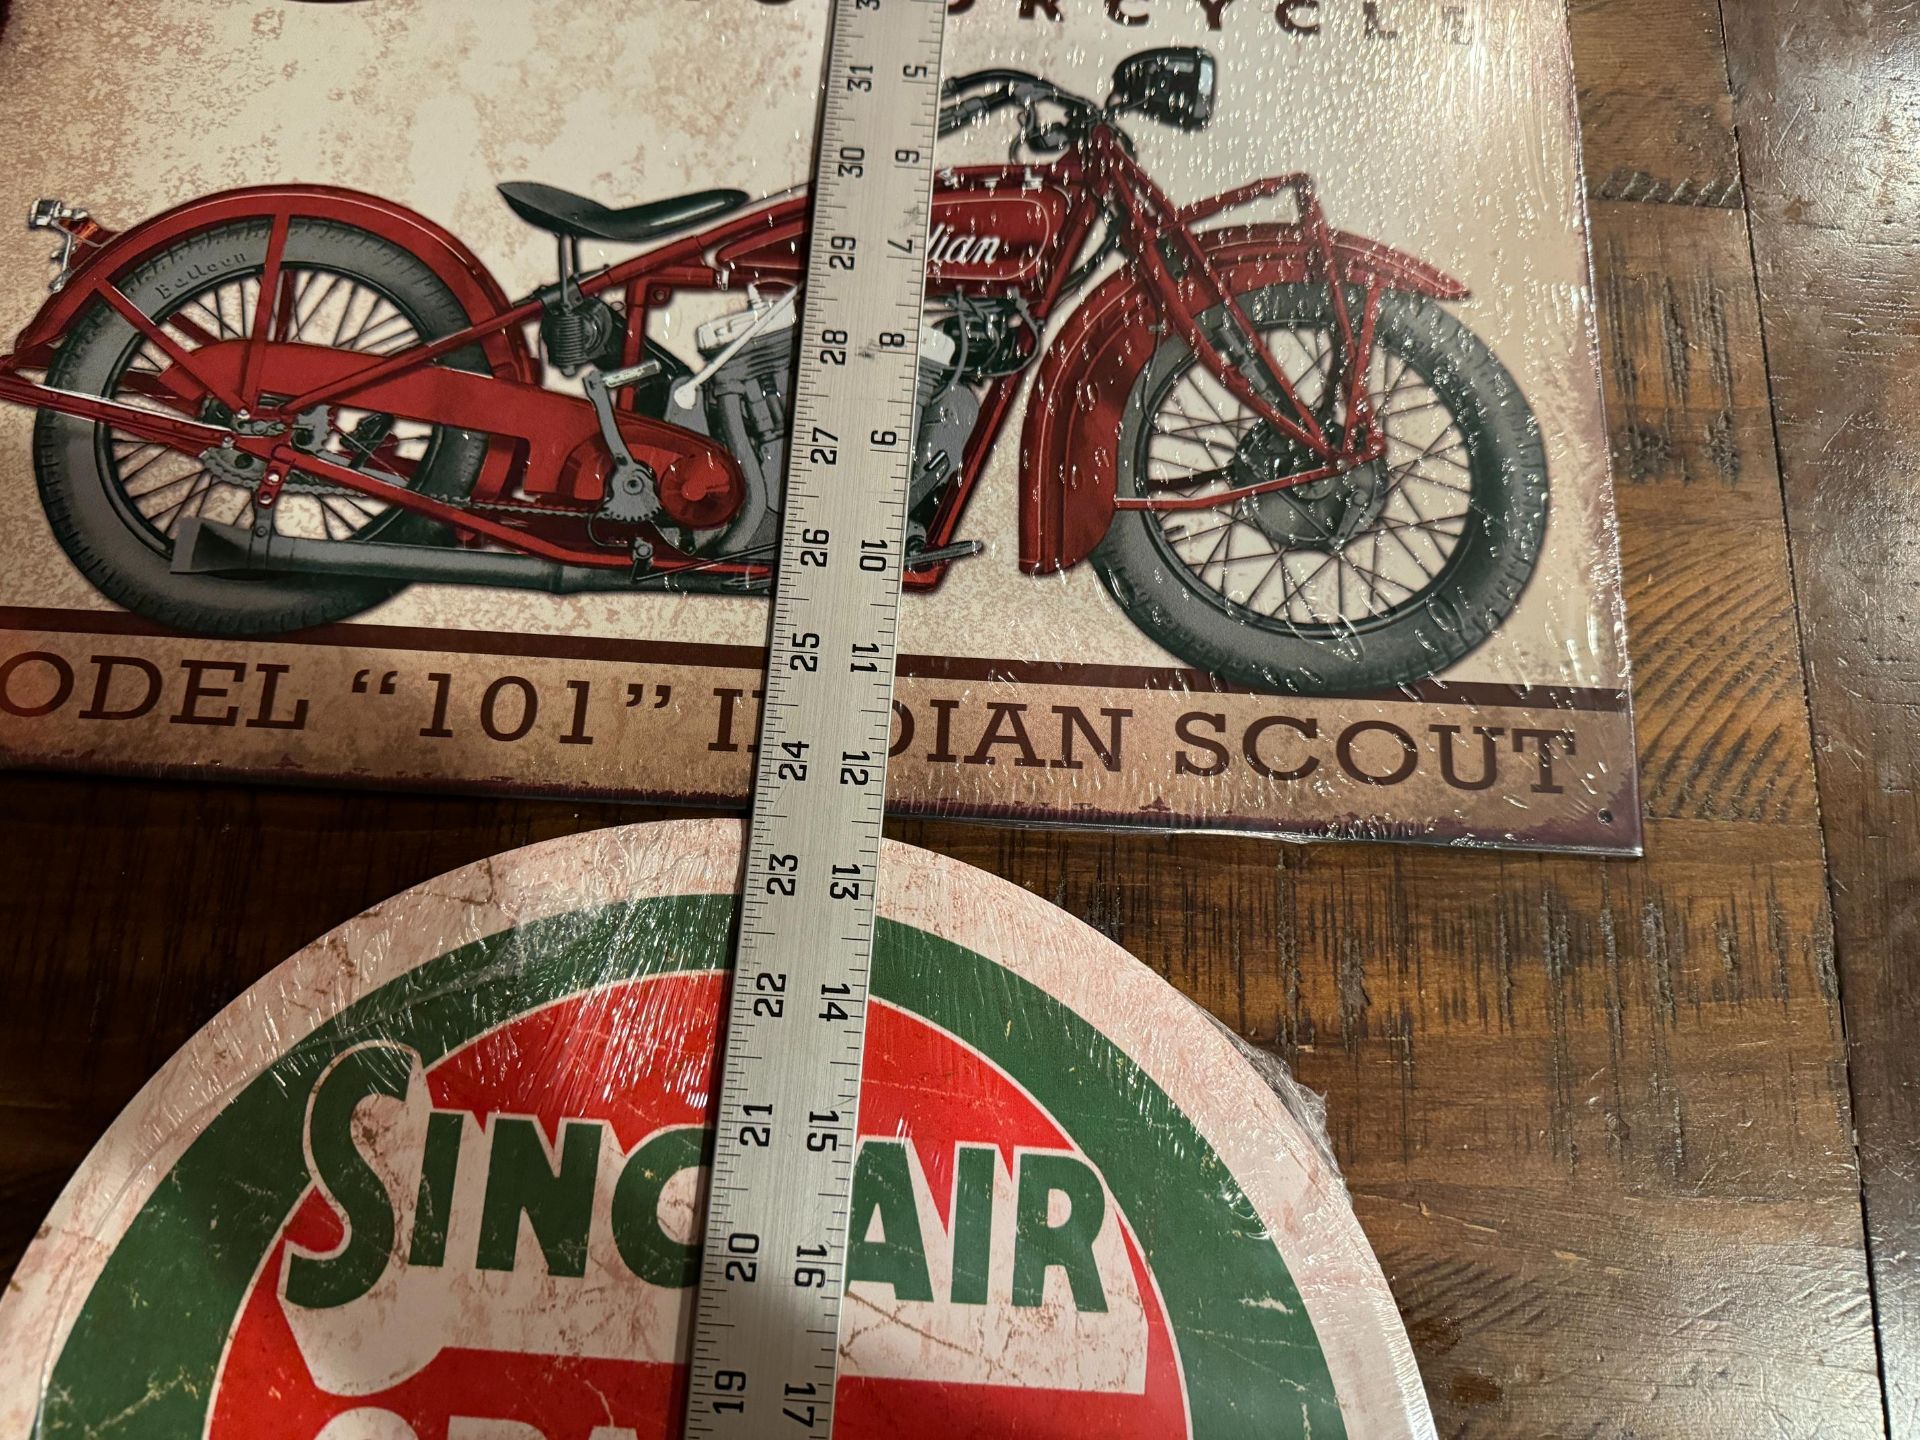 2 Retro Vintage Signs"" Sinclair & Indian Motorcycle - Image 4 of 6